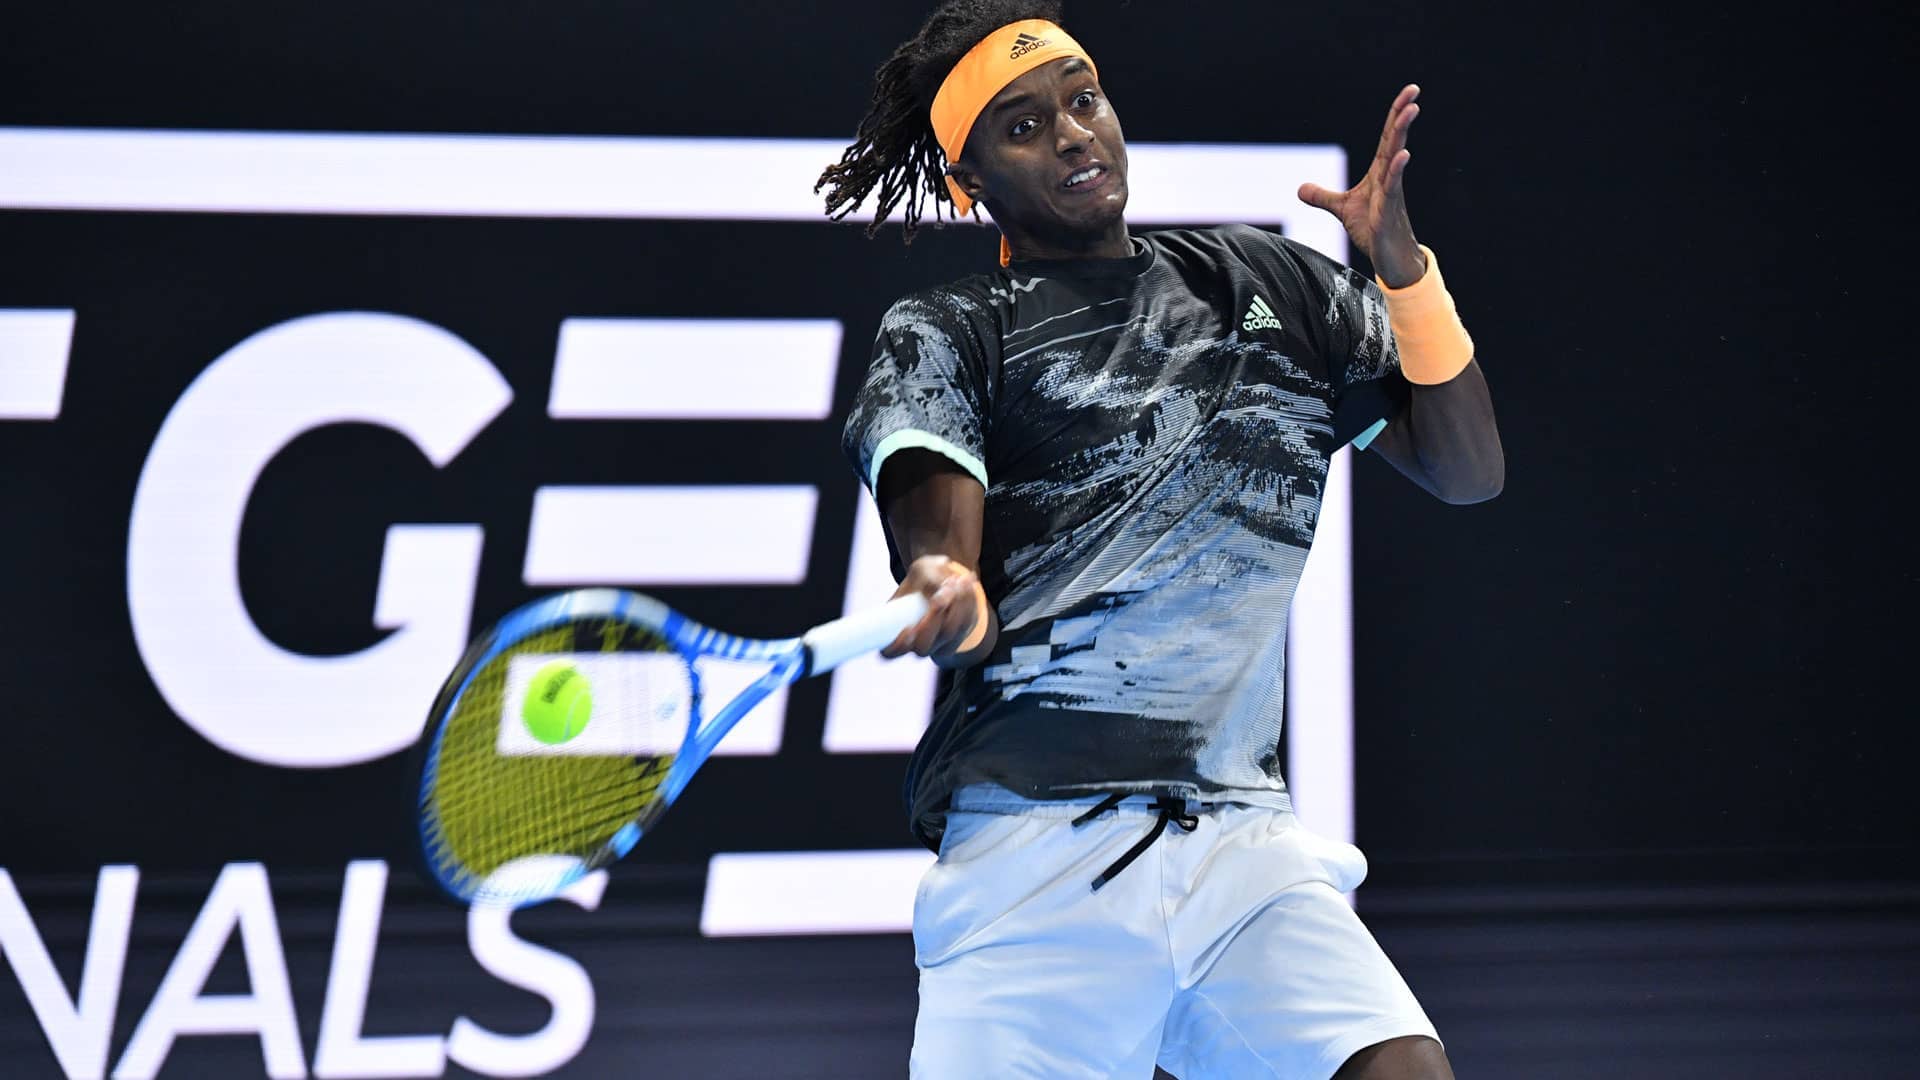 Mikael Ymer has thrived off support from Stefan Edberg and other Swedish tennis legends.